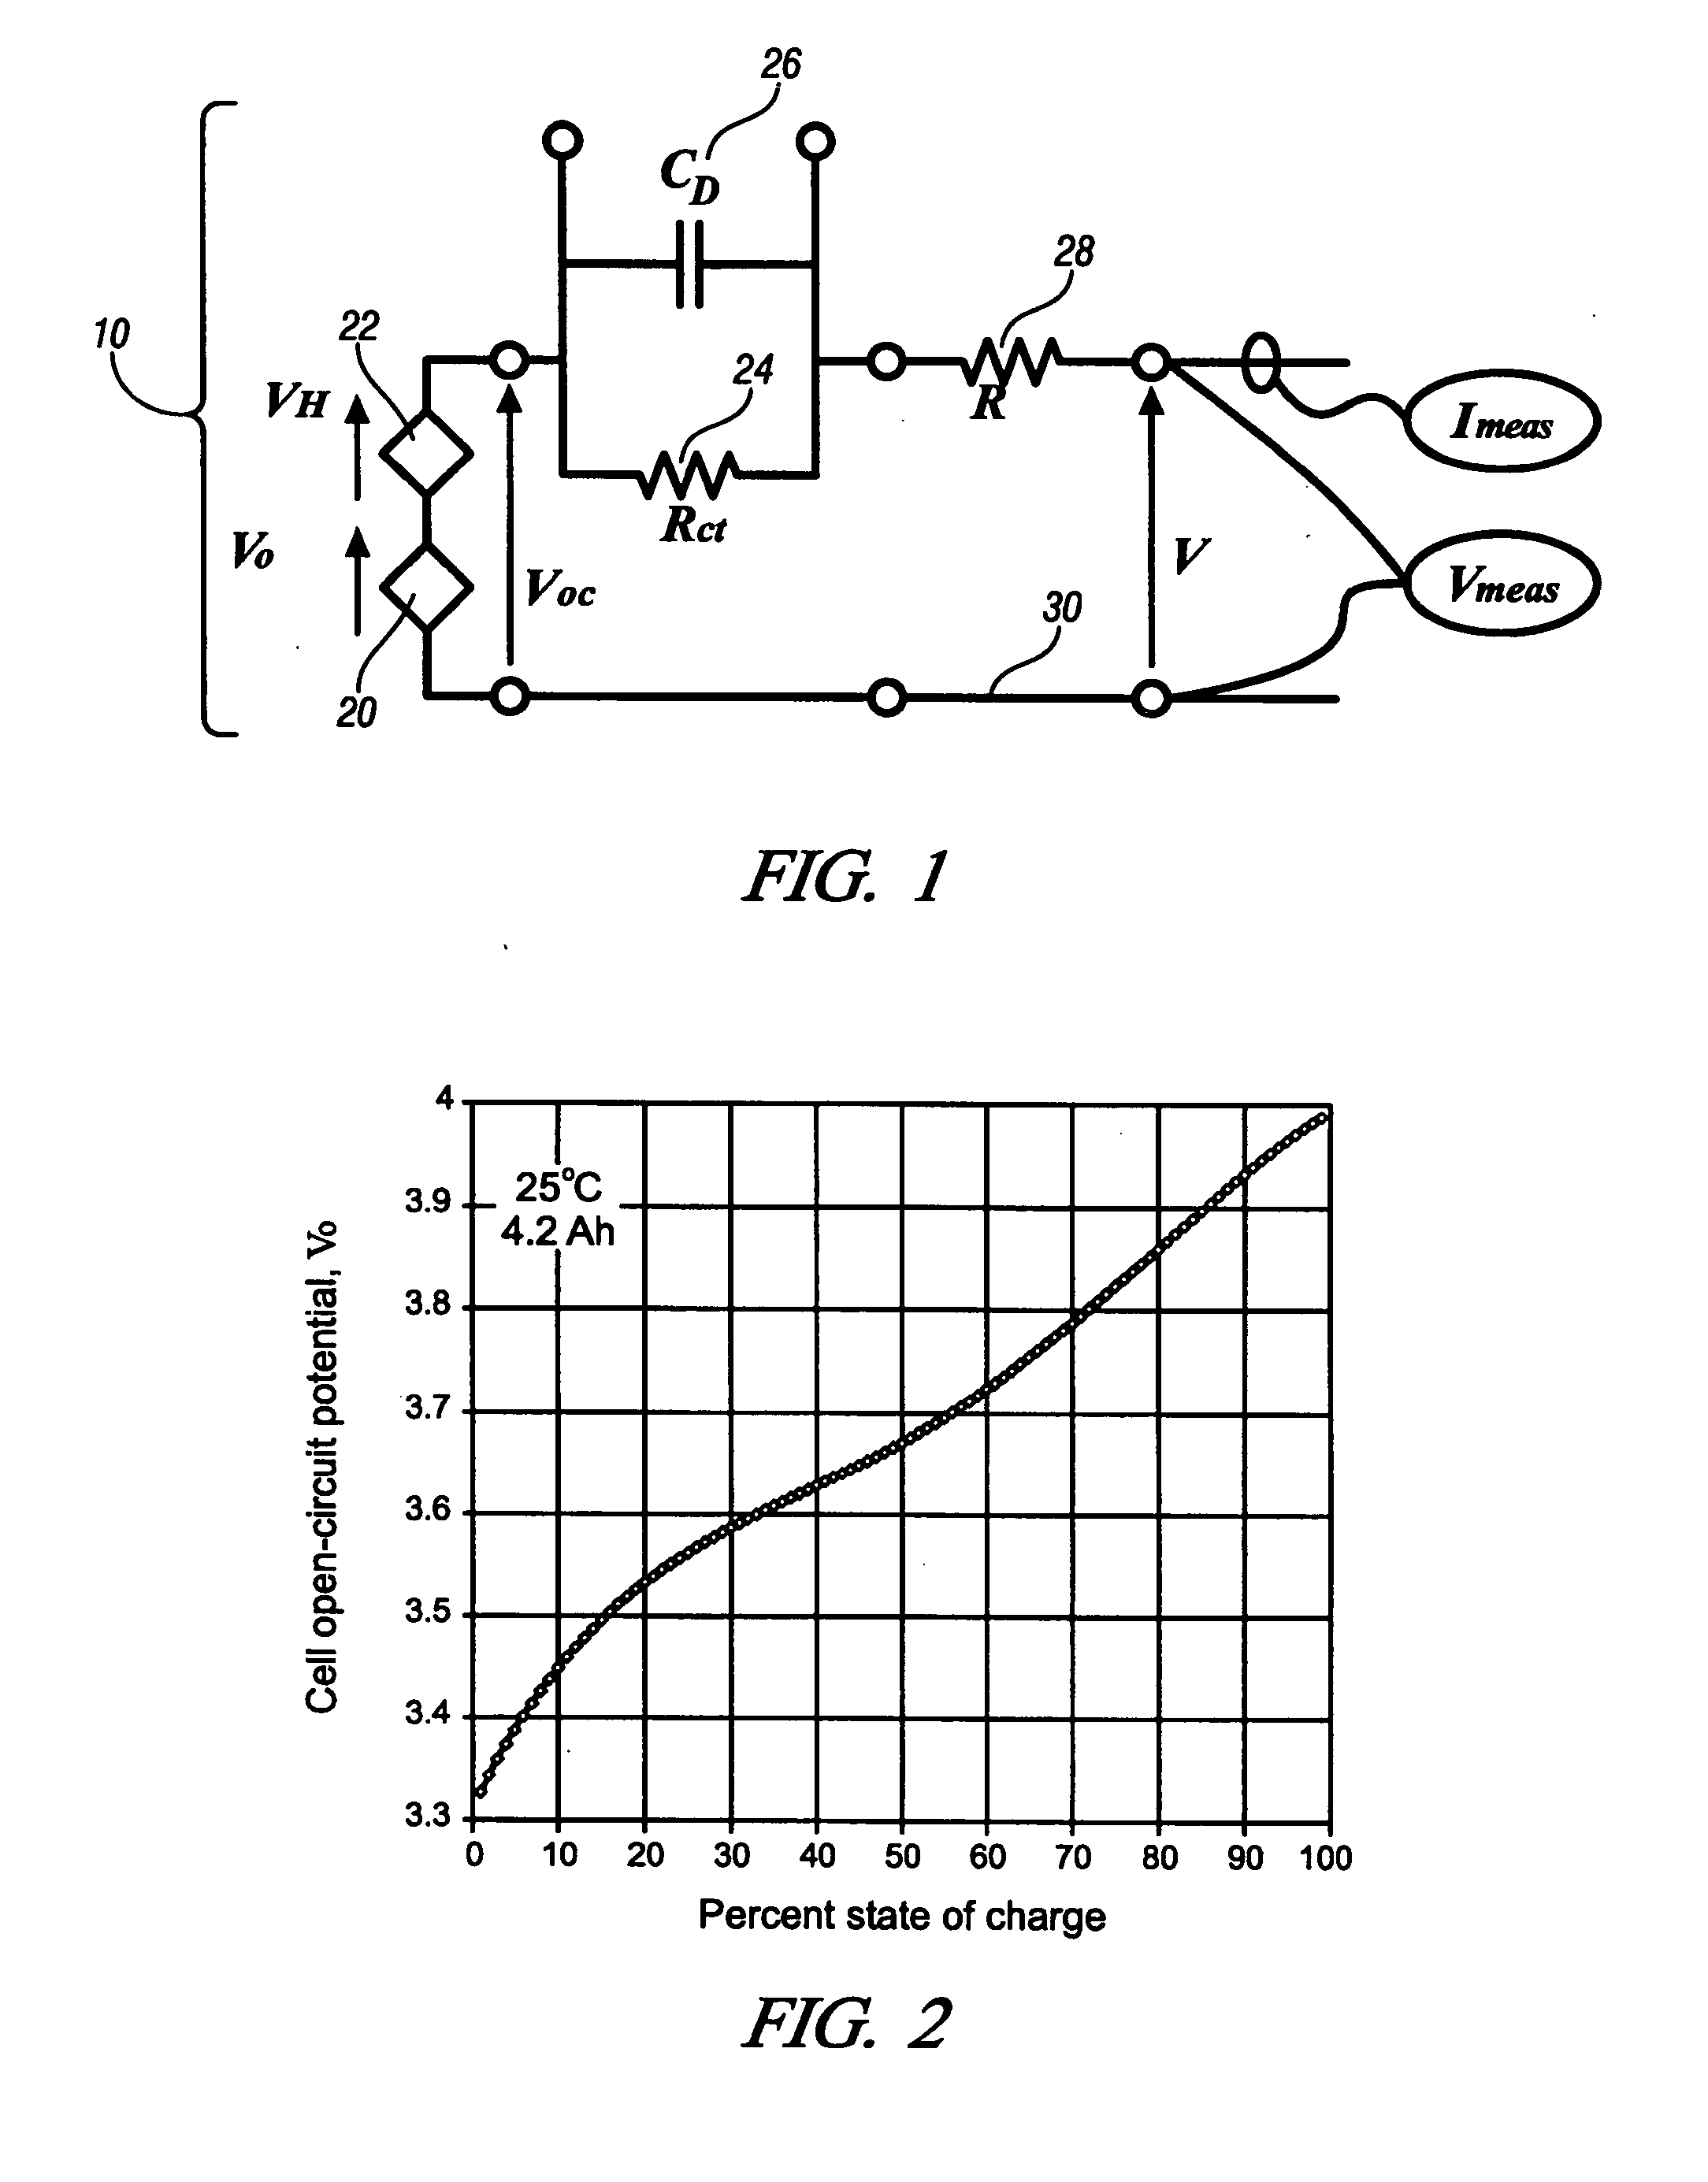 Method for control and monitoring using a state estimator having variable forgetting factors